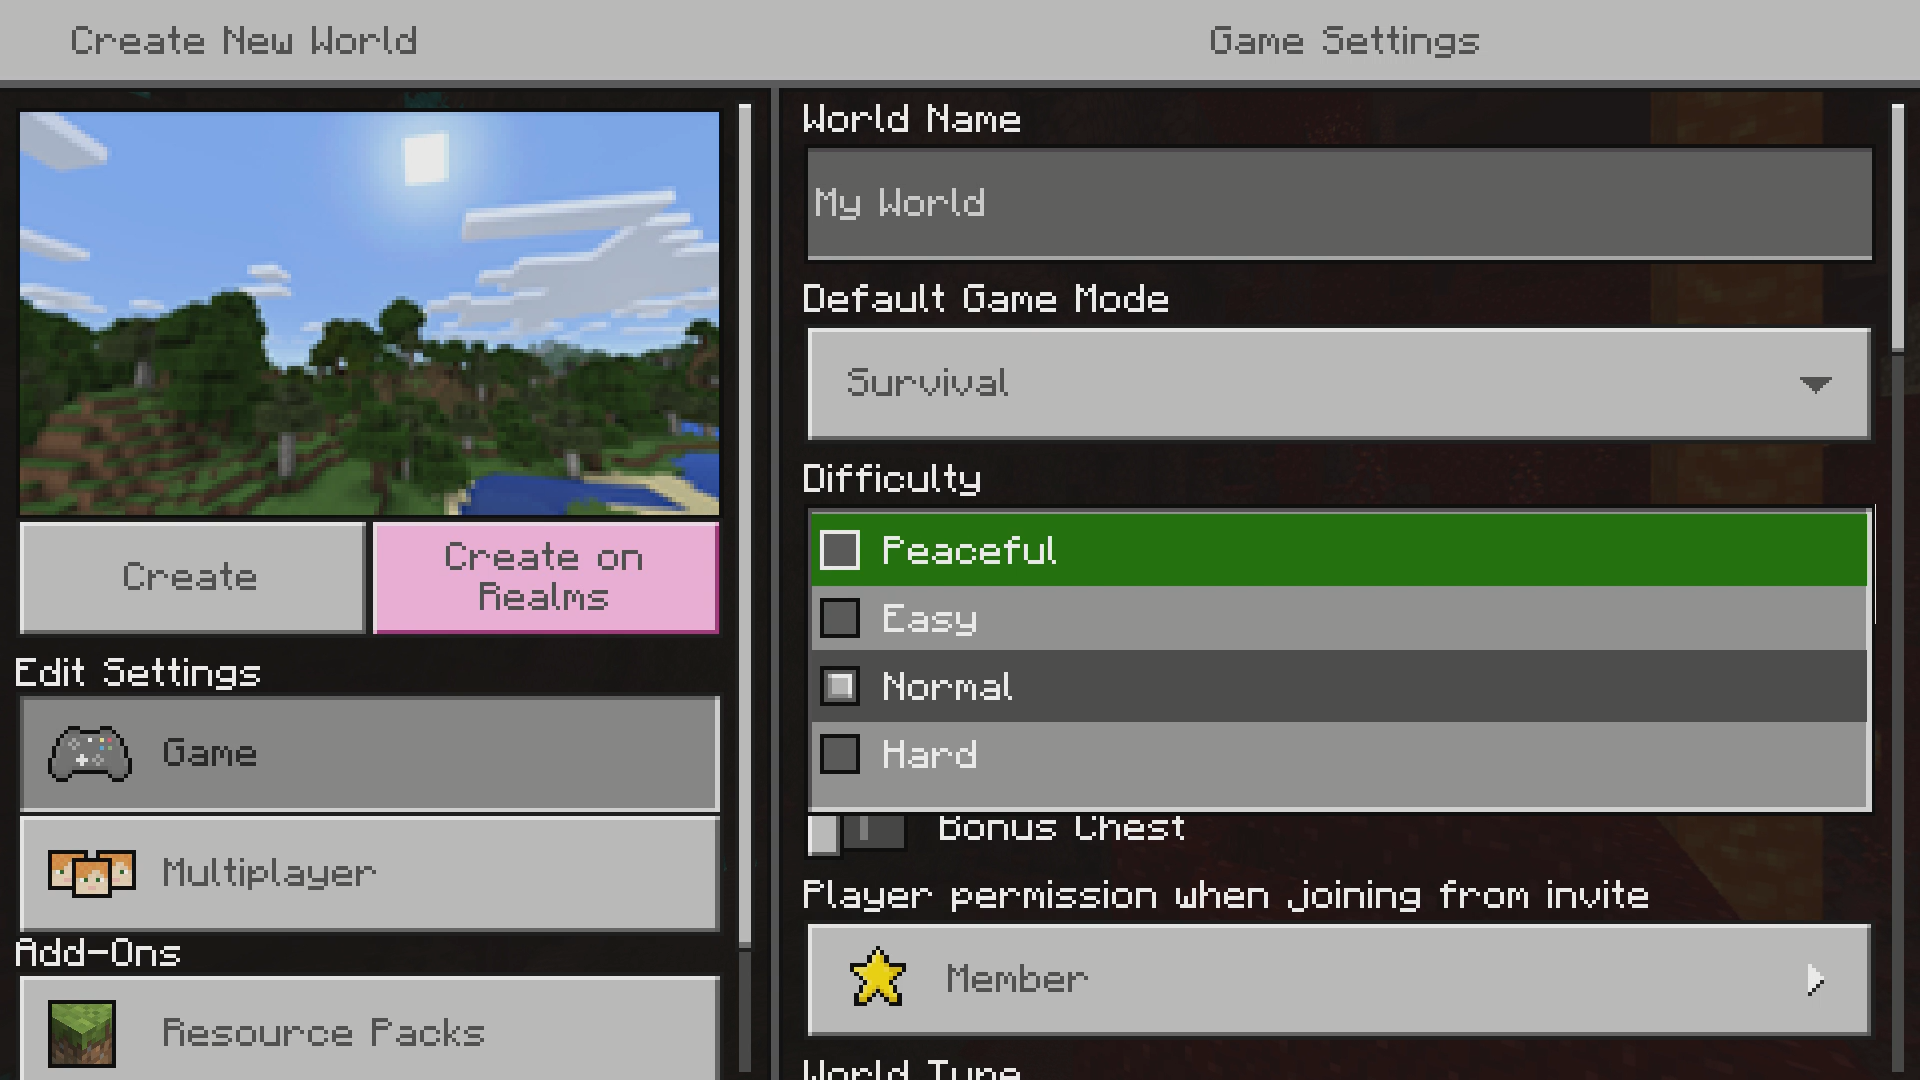 A screenshot of the “Create New World” menu in Minecraft. The value for “Default Game Mode” is set to “Survival.” There are four difficulty values on screen to choose from for Survival Mode, including “Peaceful,” “Easy,” “Normal,” and “Hard.”